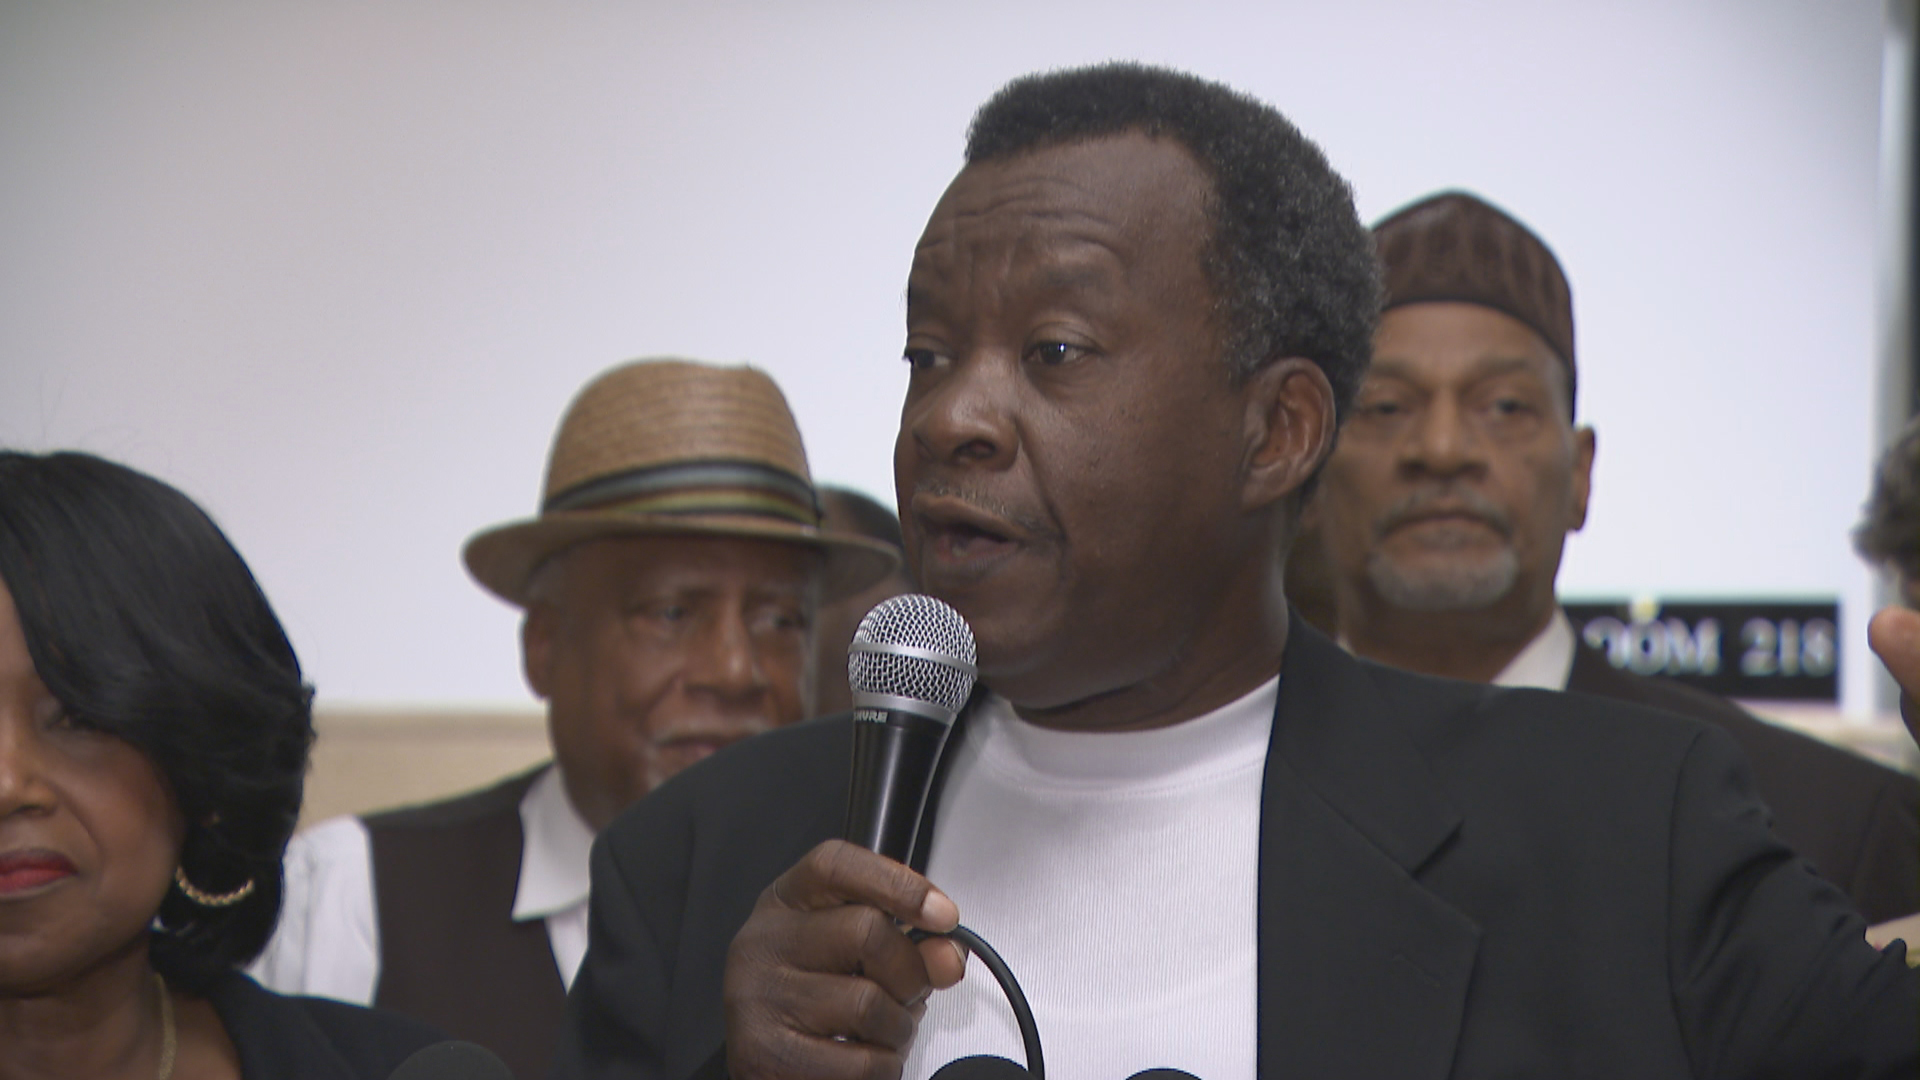 Willie Wilson: the Democratic party candidate you've never heard